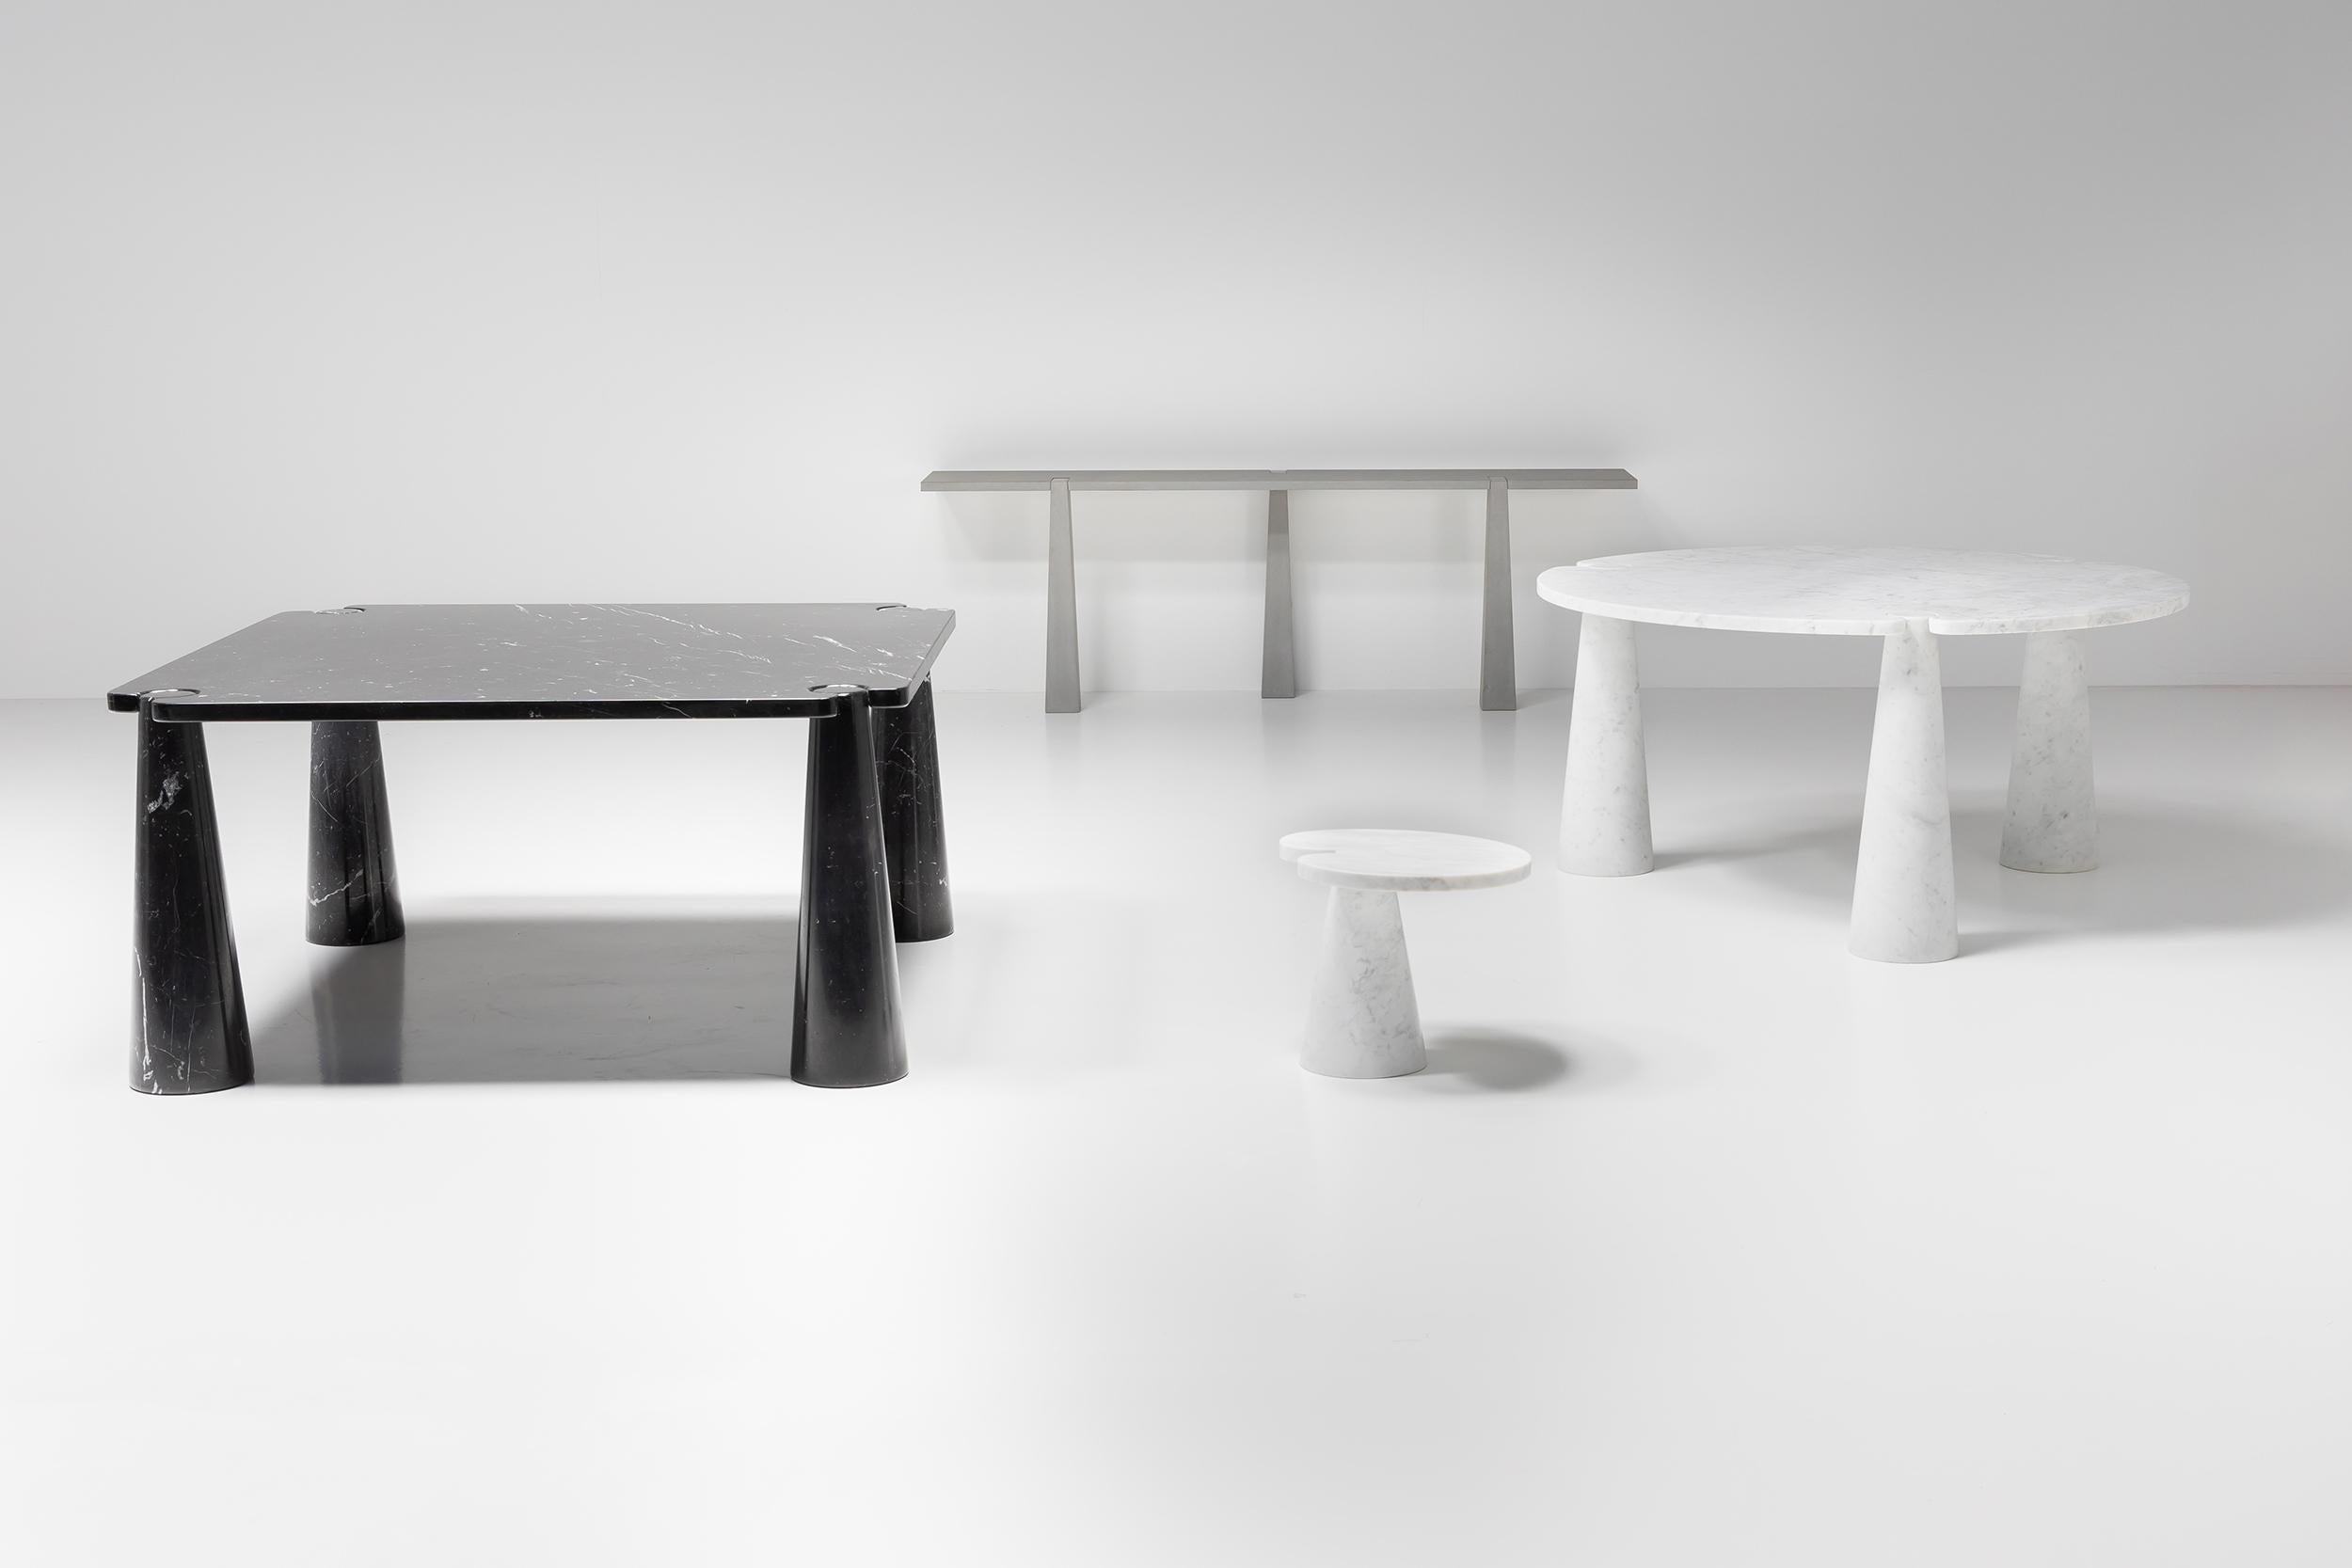 Mangiarotti 'Eros' Square Marble Dining Table, Italy, Post-Modern, 1970's For Sale 8